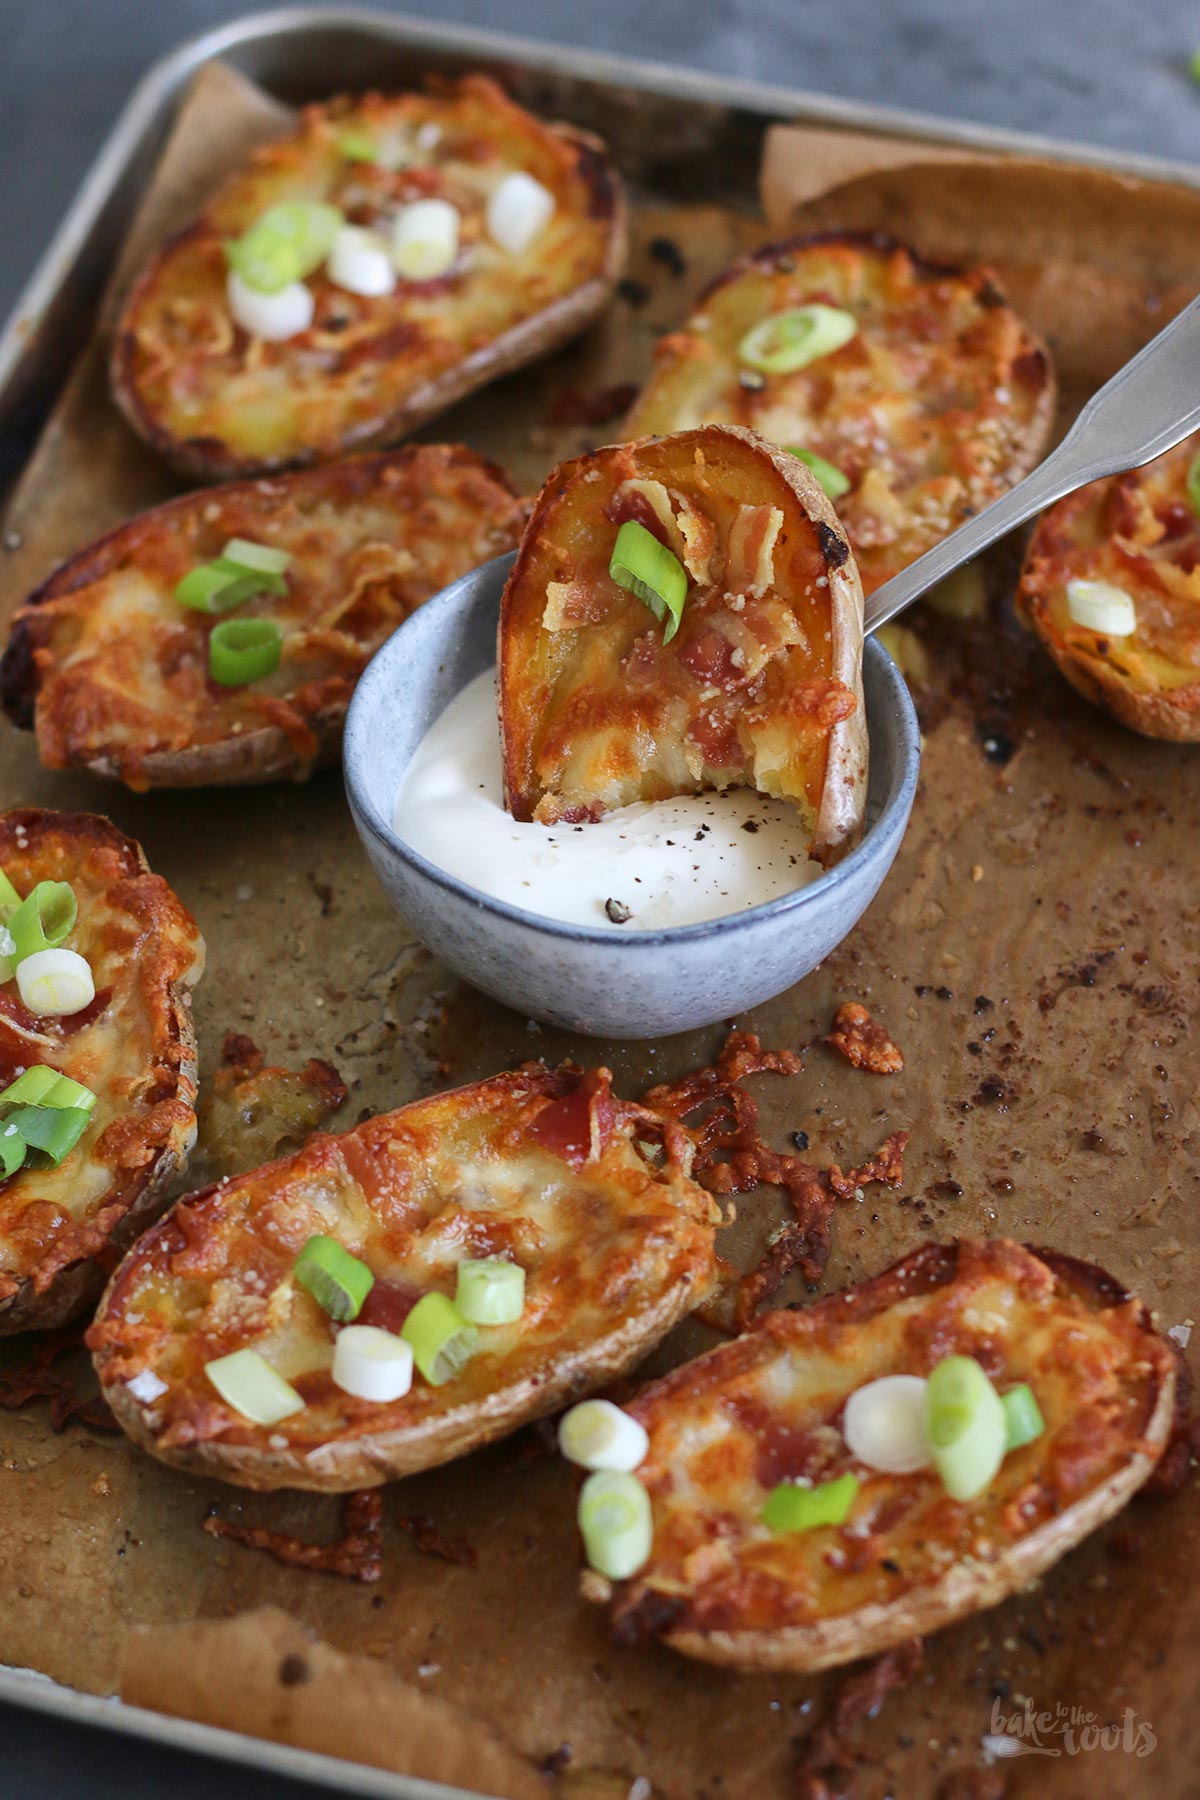 Potato Skins with Bacon & Cheese | Bake to the roots